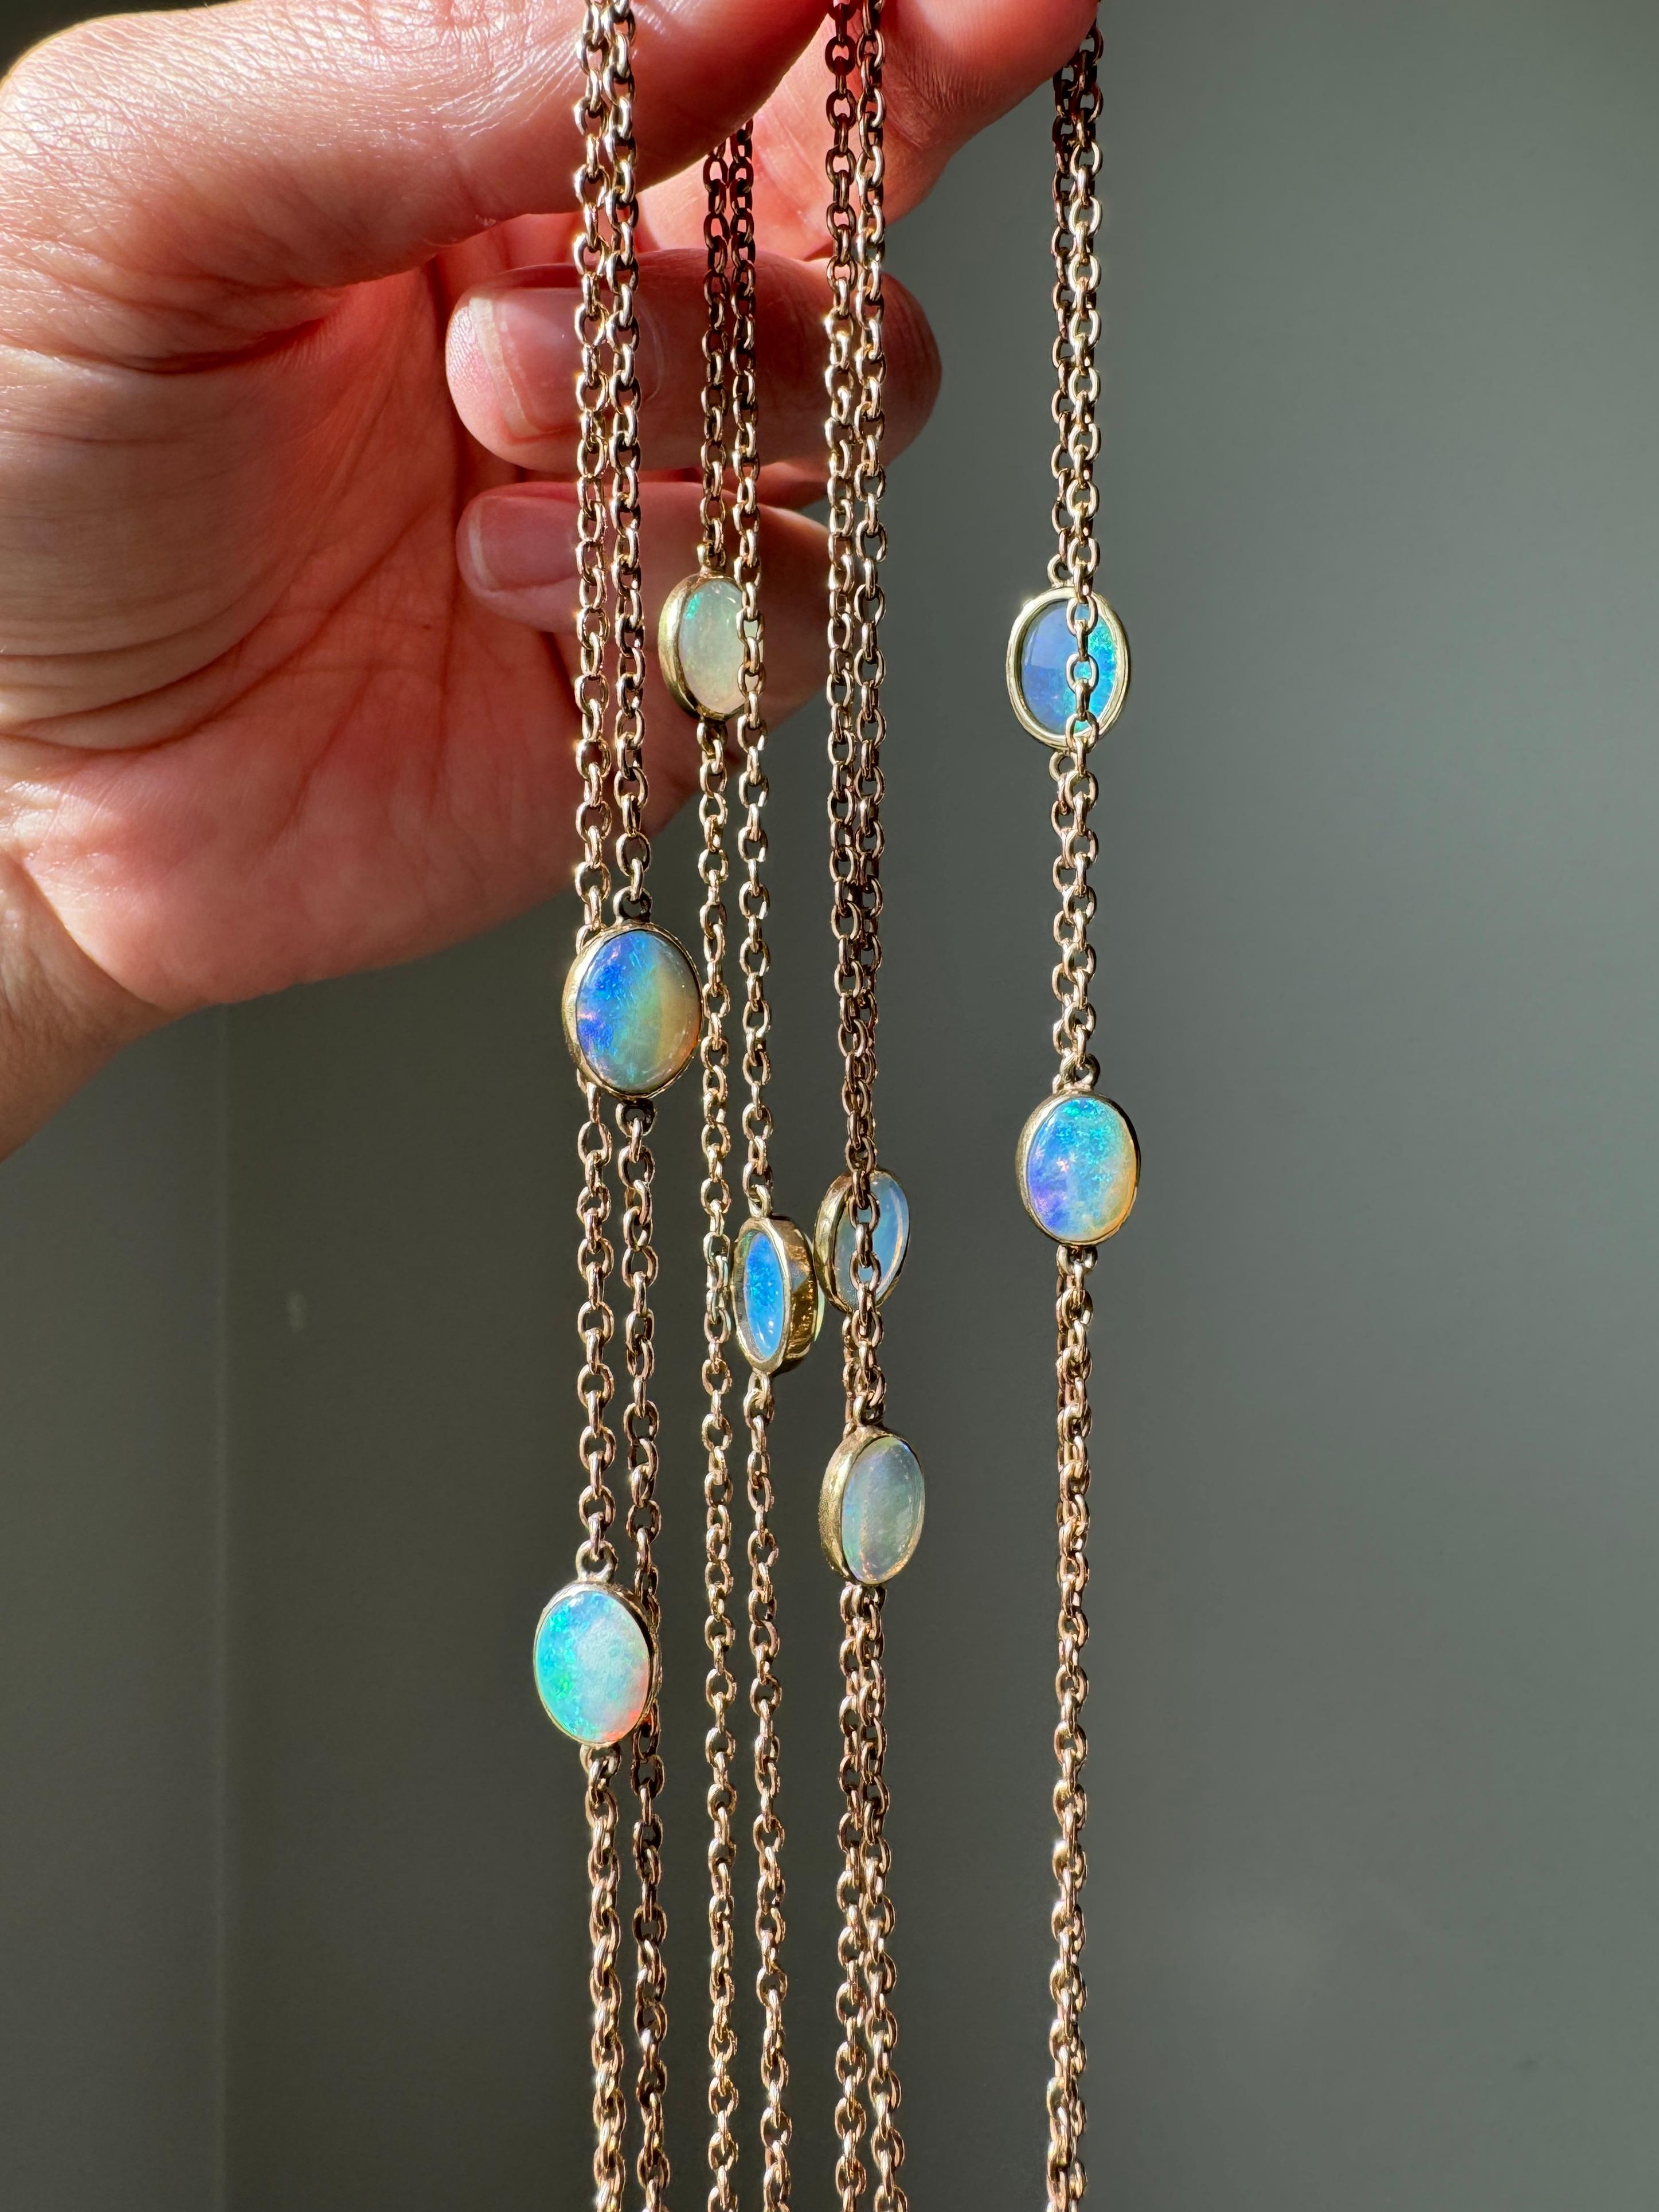 This wonderful seventy-none inch antique long chain is adorned with twelve cabochon opal stations suffused with glowing pastel blues and greens, calming violet contrasted by flashes of fiery orange on 9 karat rose gold cable link chain. This